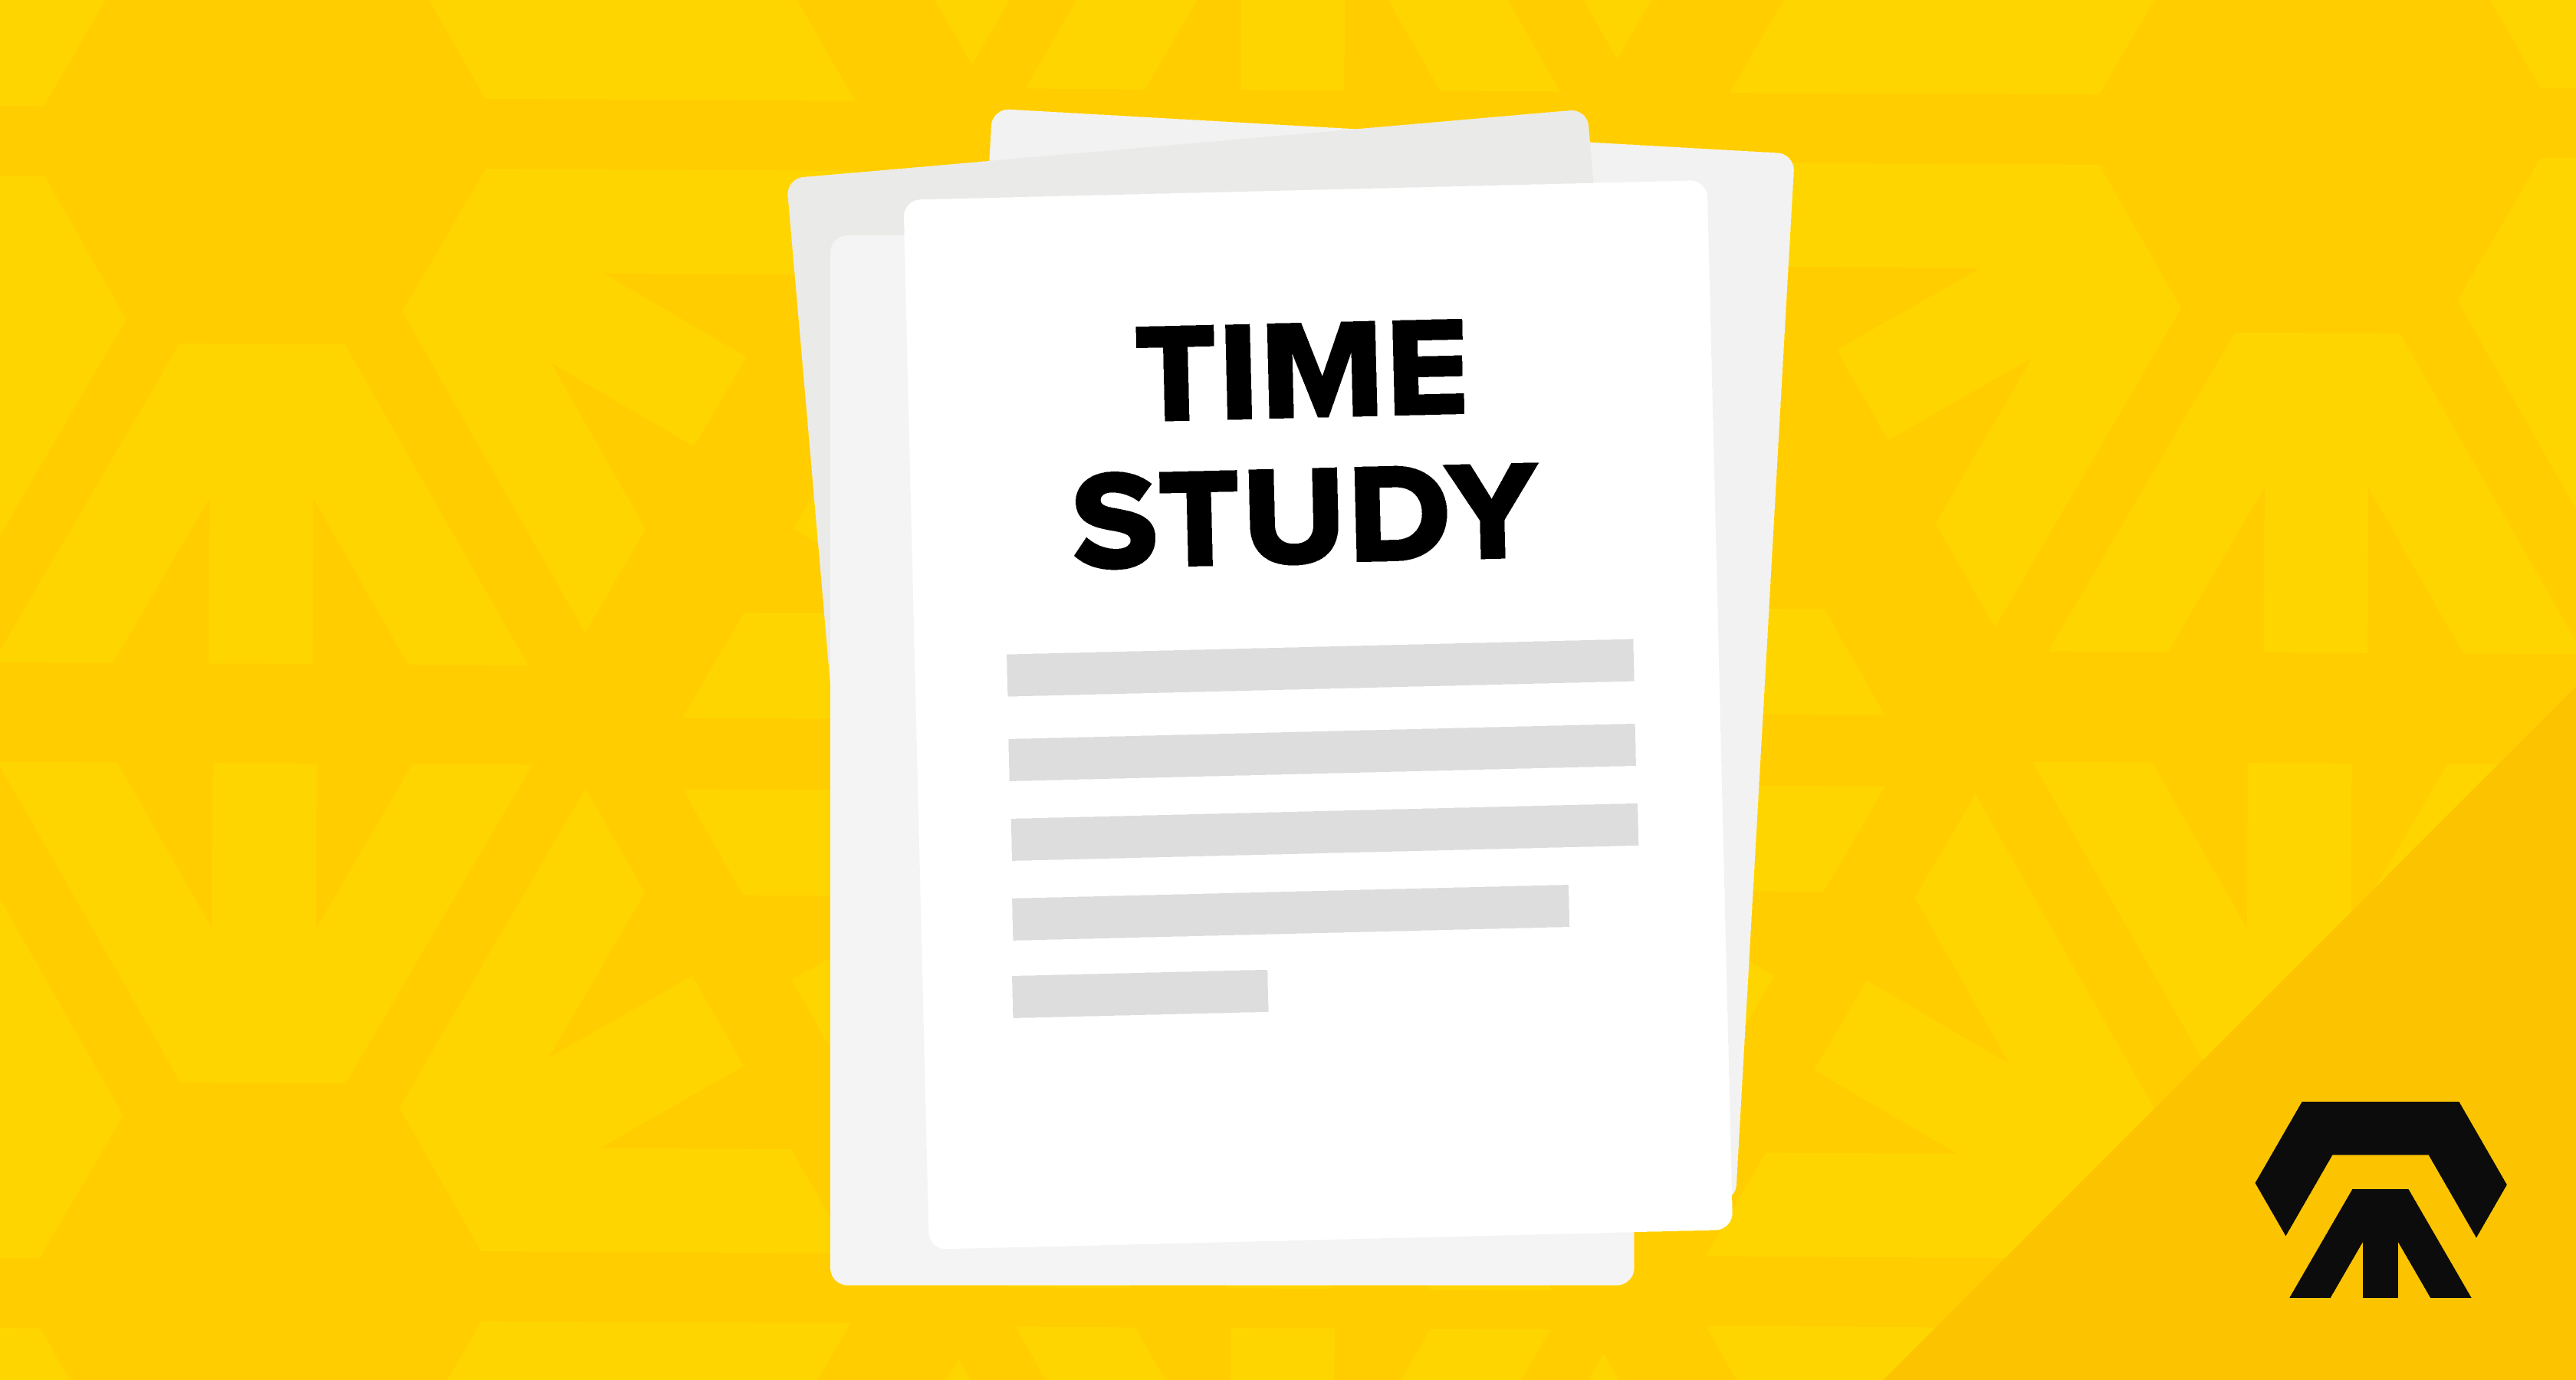 Time study analysis is critical for understanding your team’s baseline productivity and driving your improvement efforts